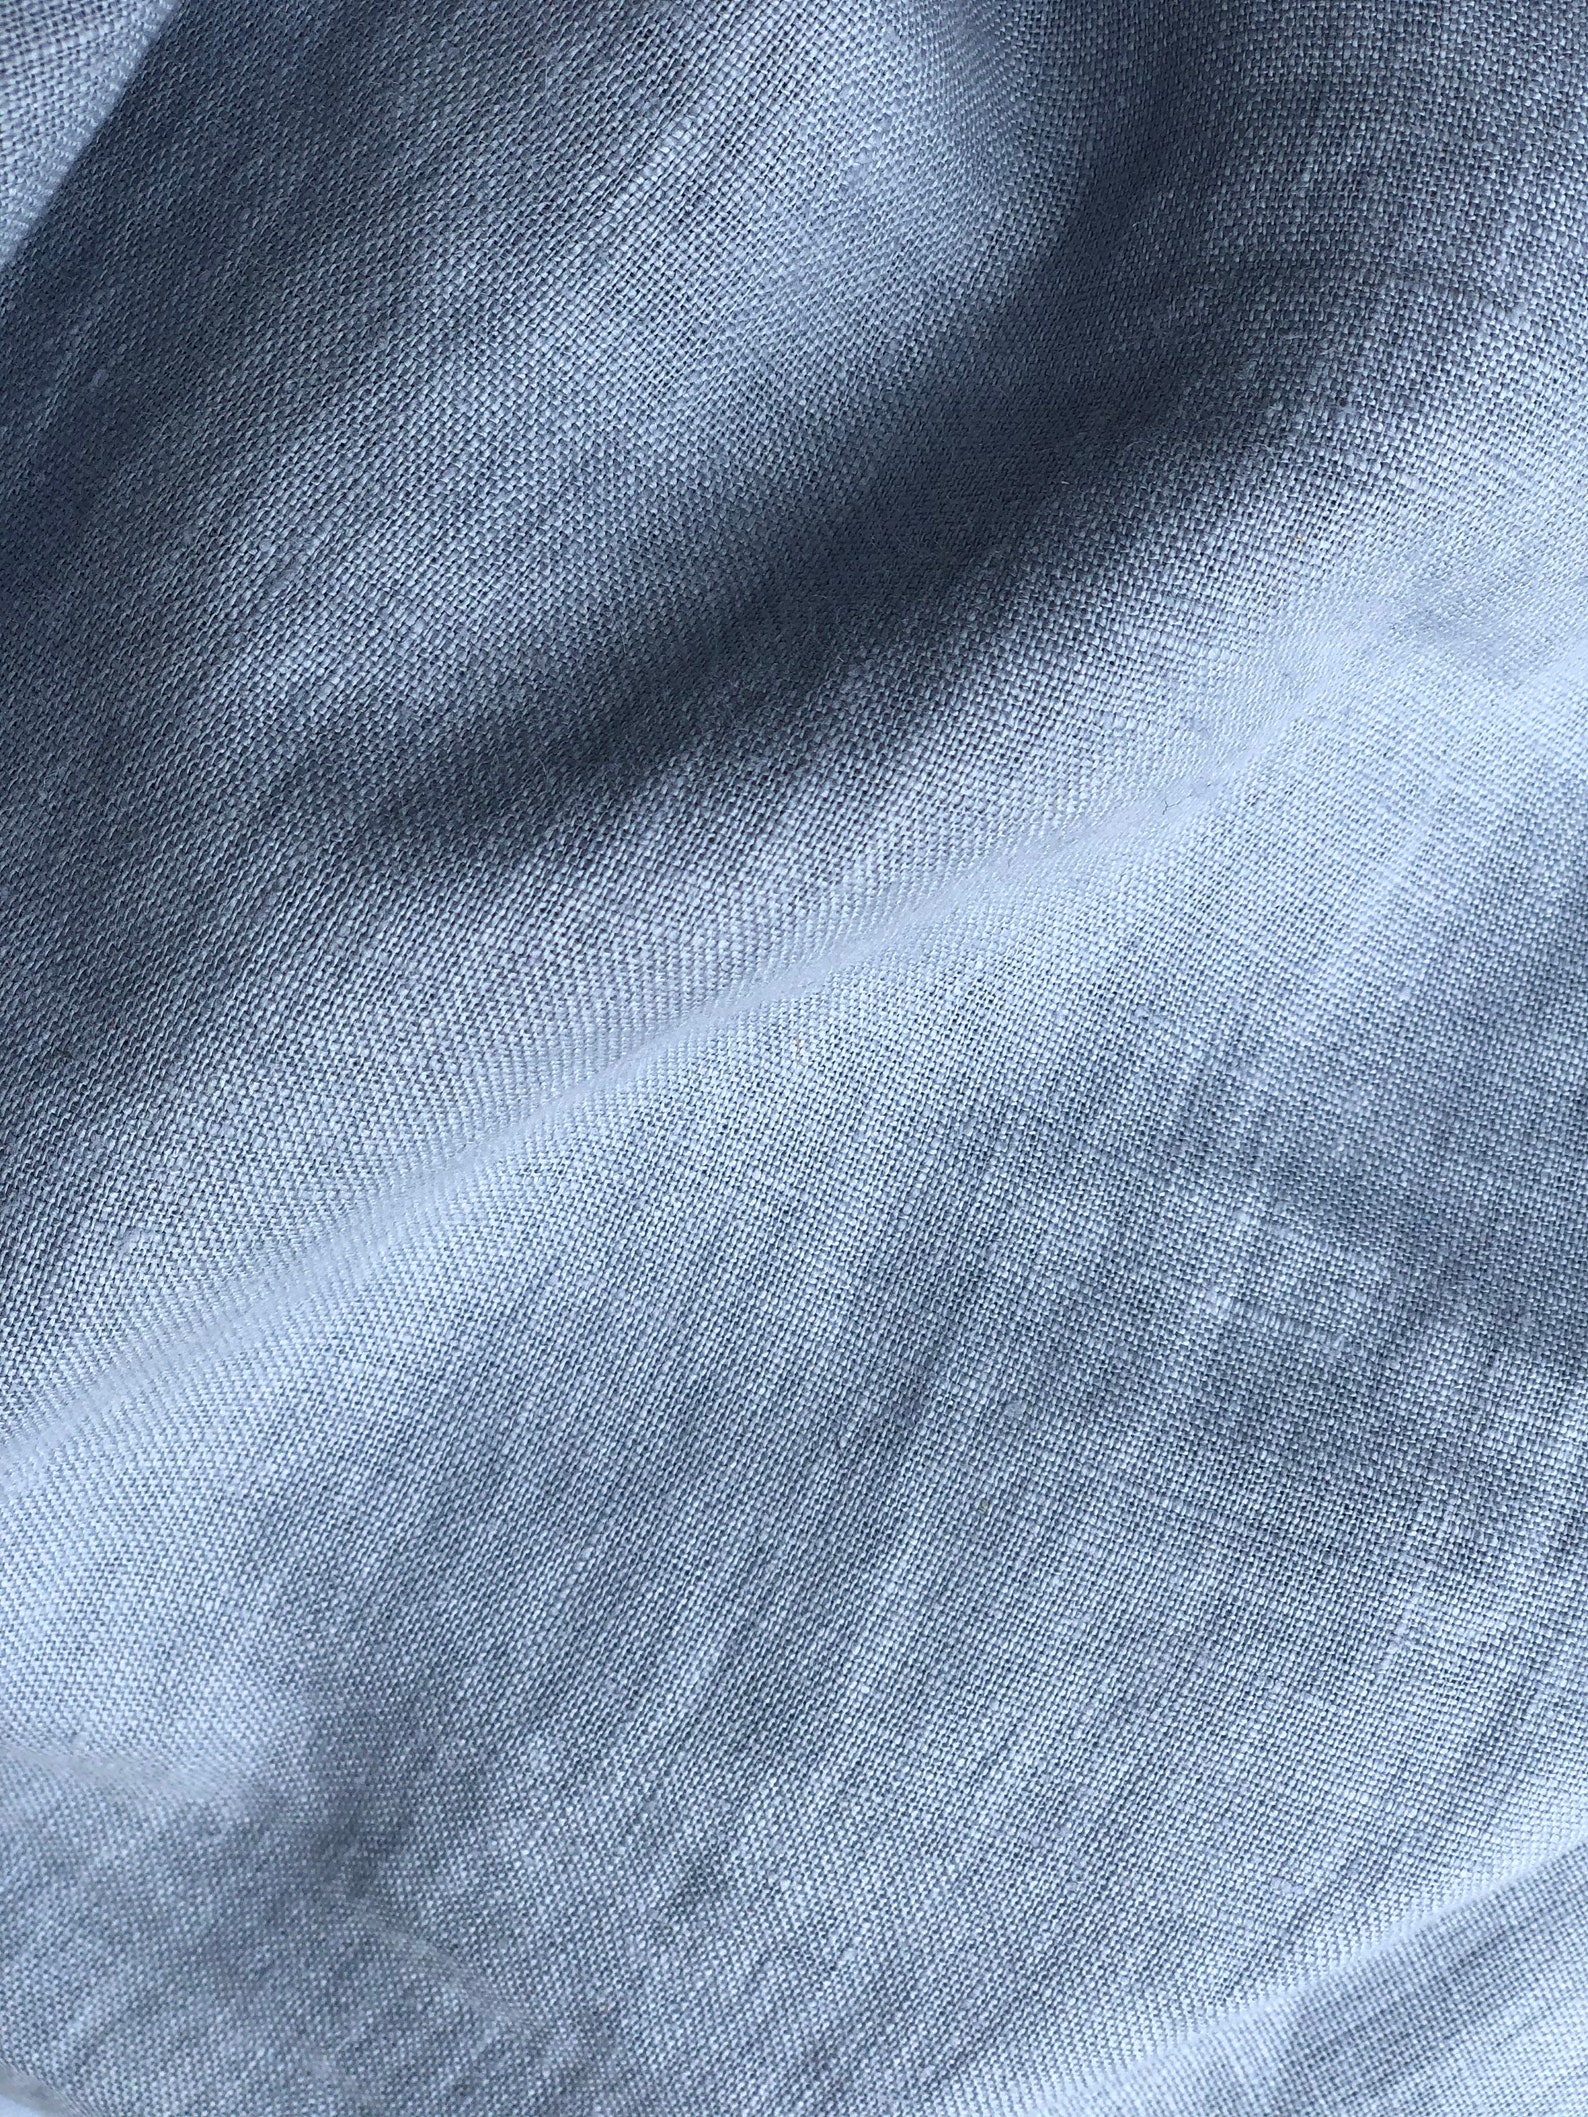 Dusty blue linen fabric Lithuania linen fabric Stone | Etsy